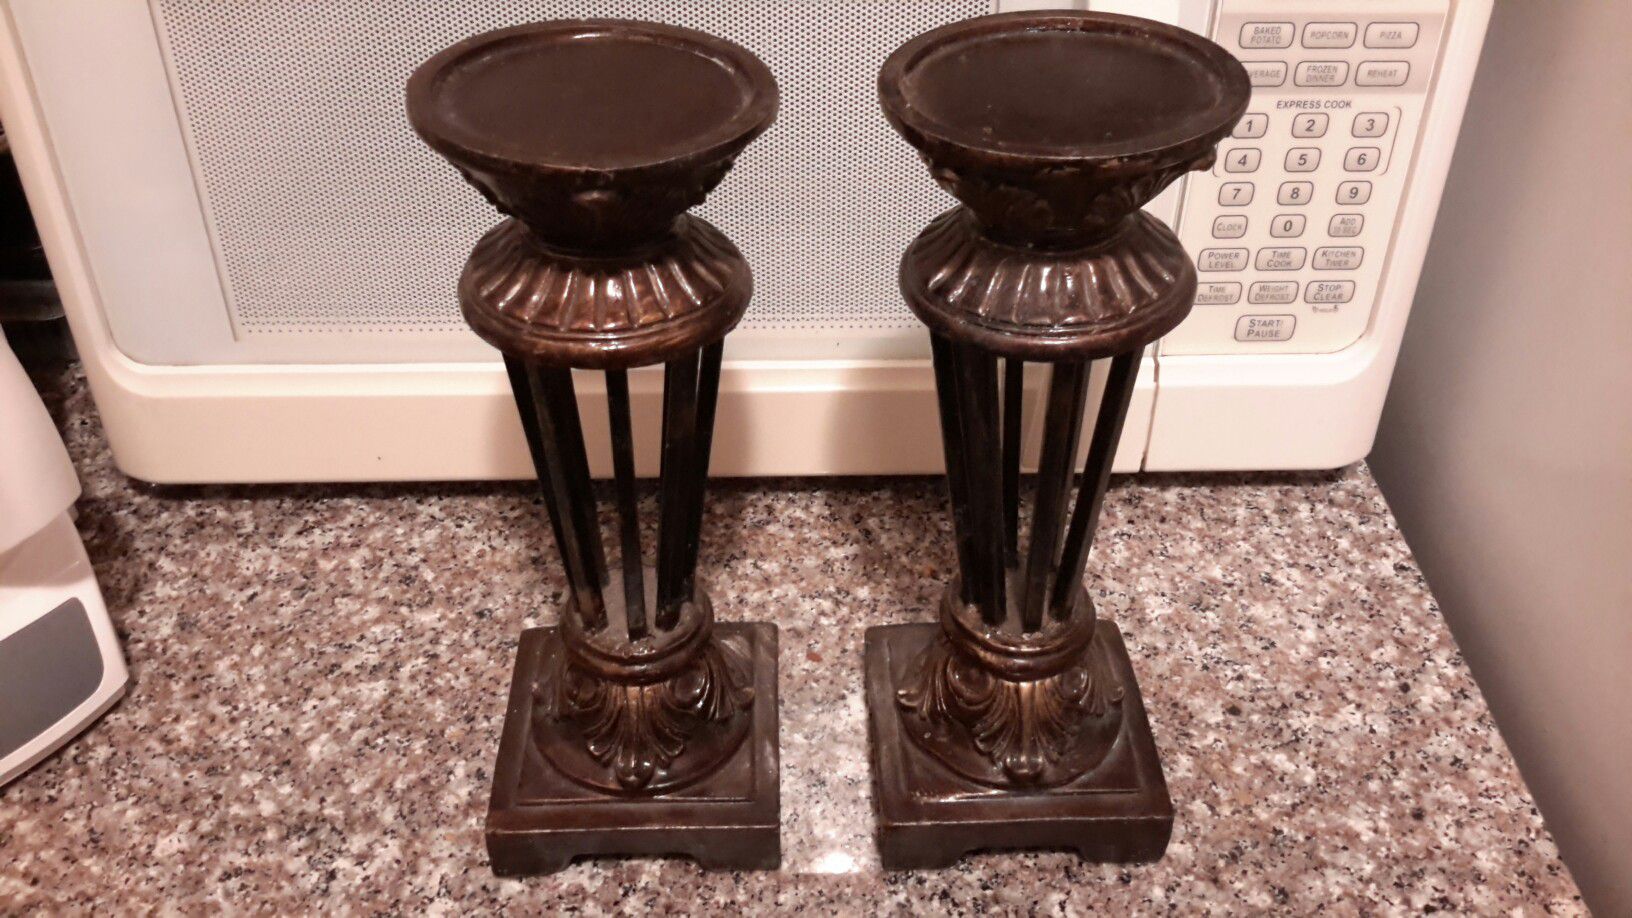 Two Beautiful Vintage Candle Holders